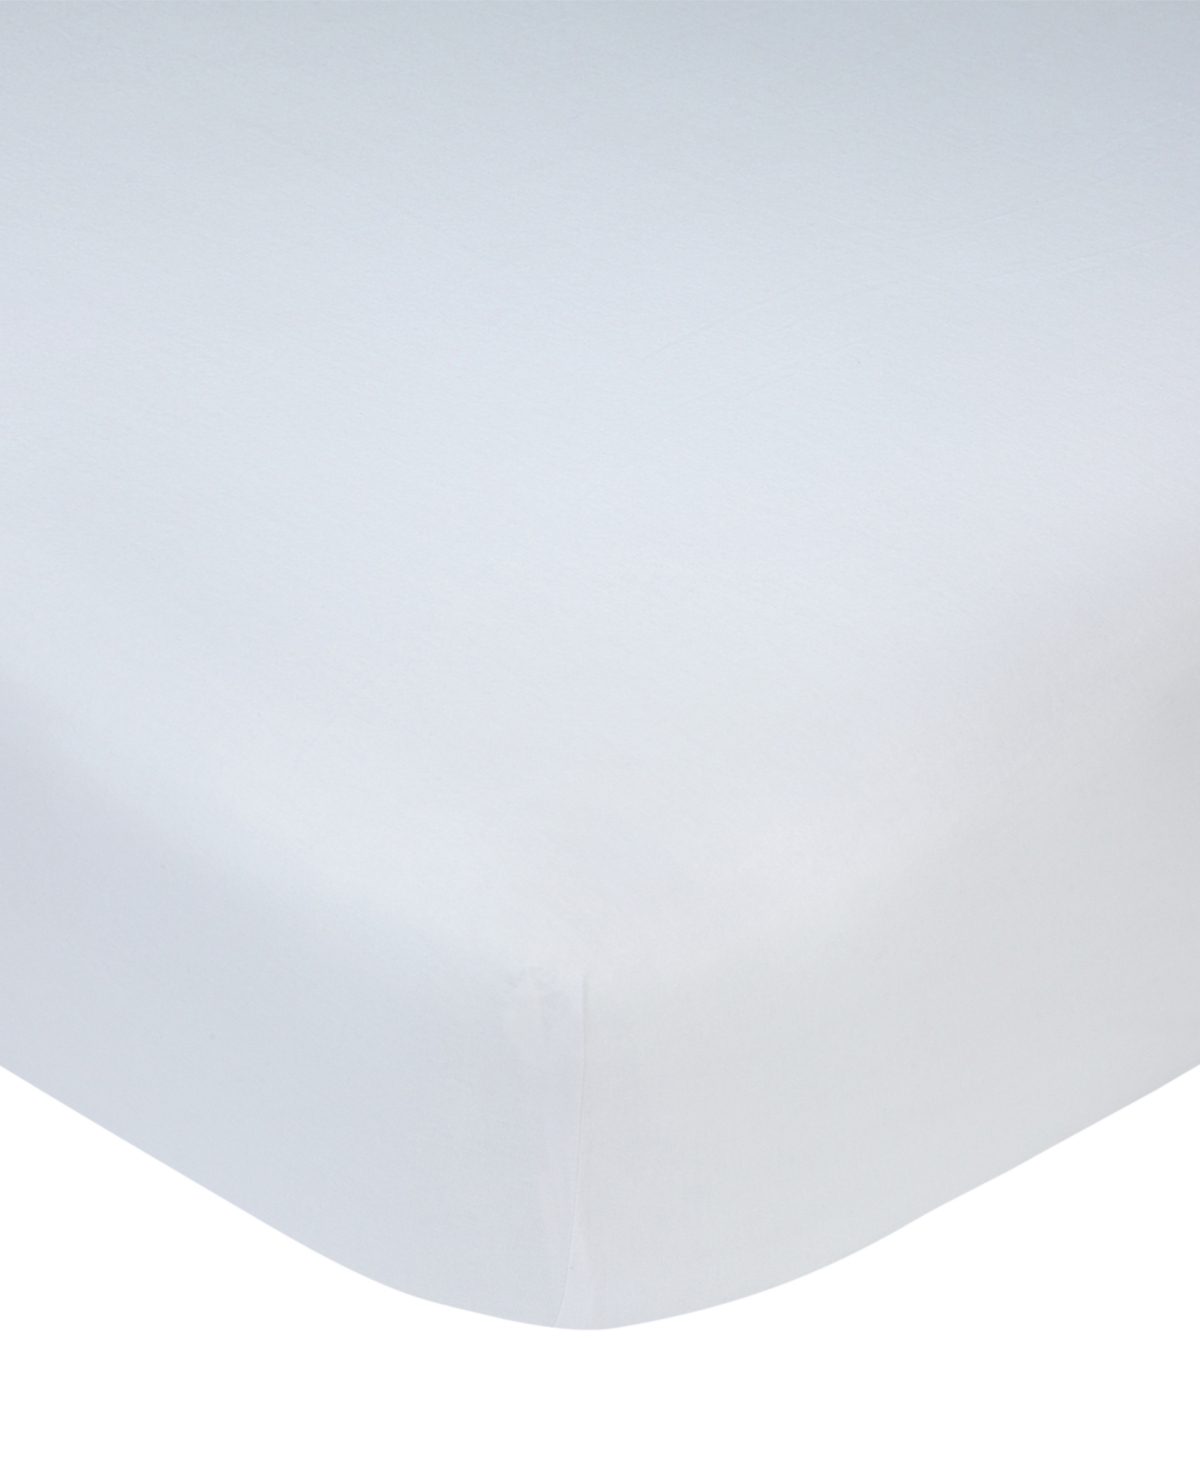 UPC 085214108865 product image for Carter's 100% Cotton Sateen Fitted Crib Sheet Bedding | upcitemdb.com